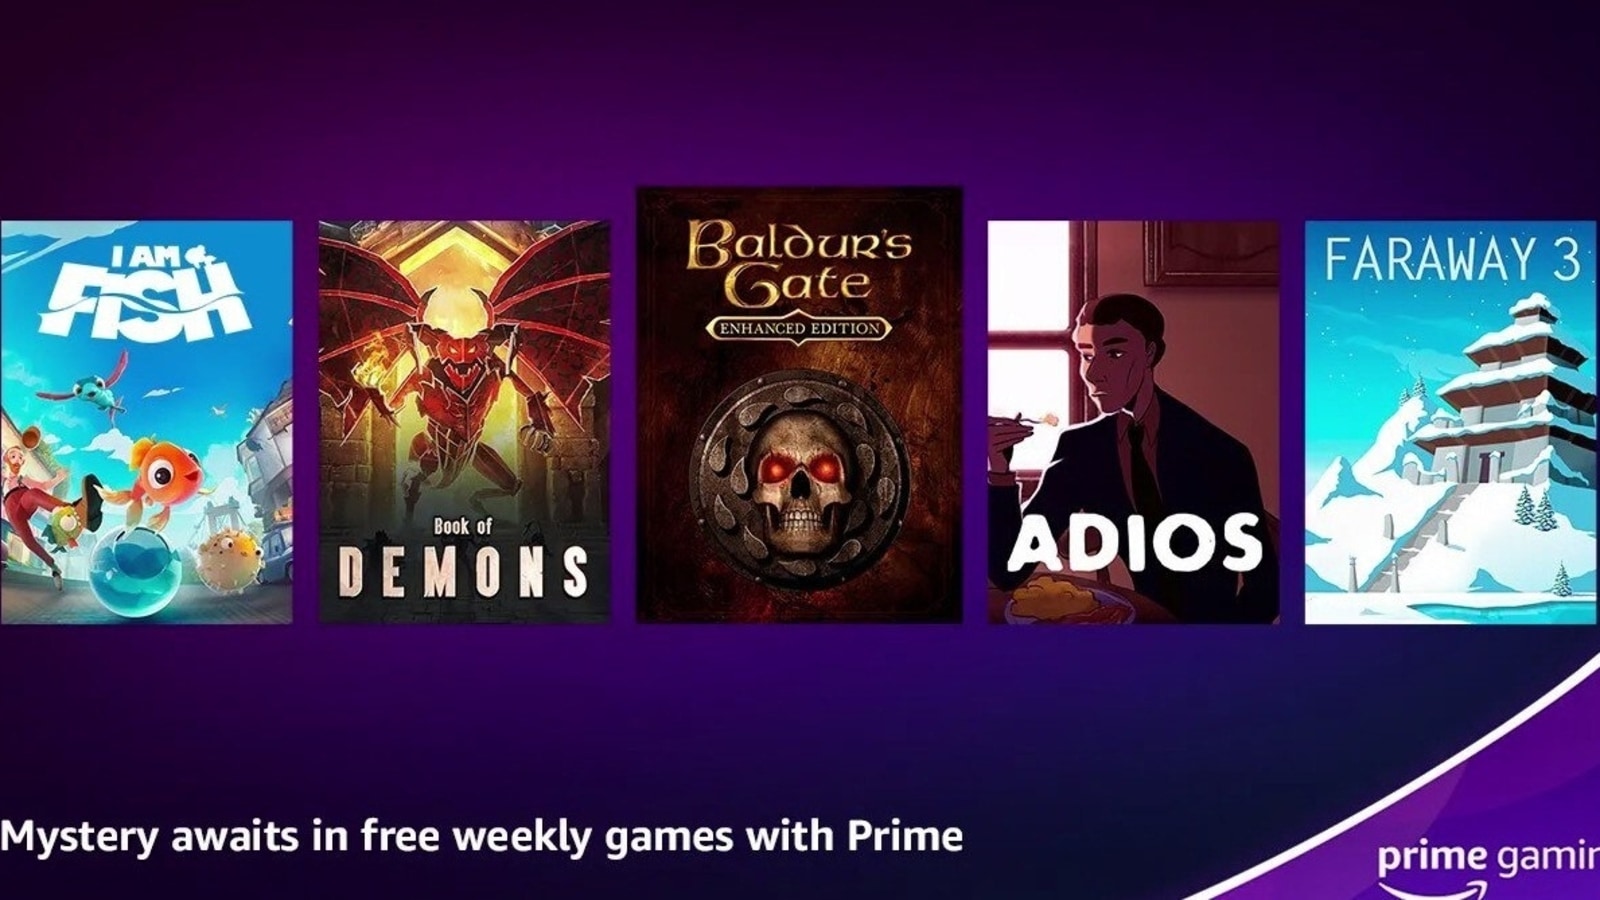 To whoever is in charge of doing prime gaming, would you mind